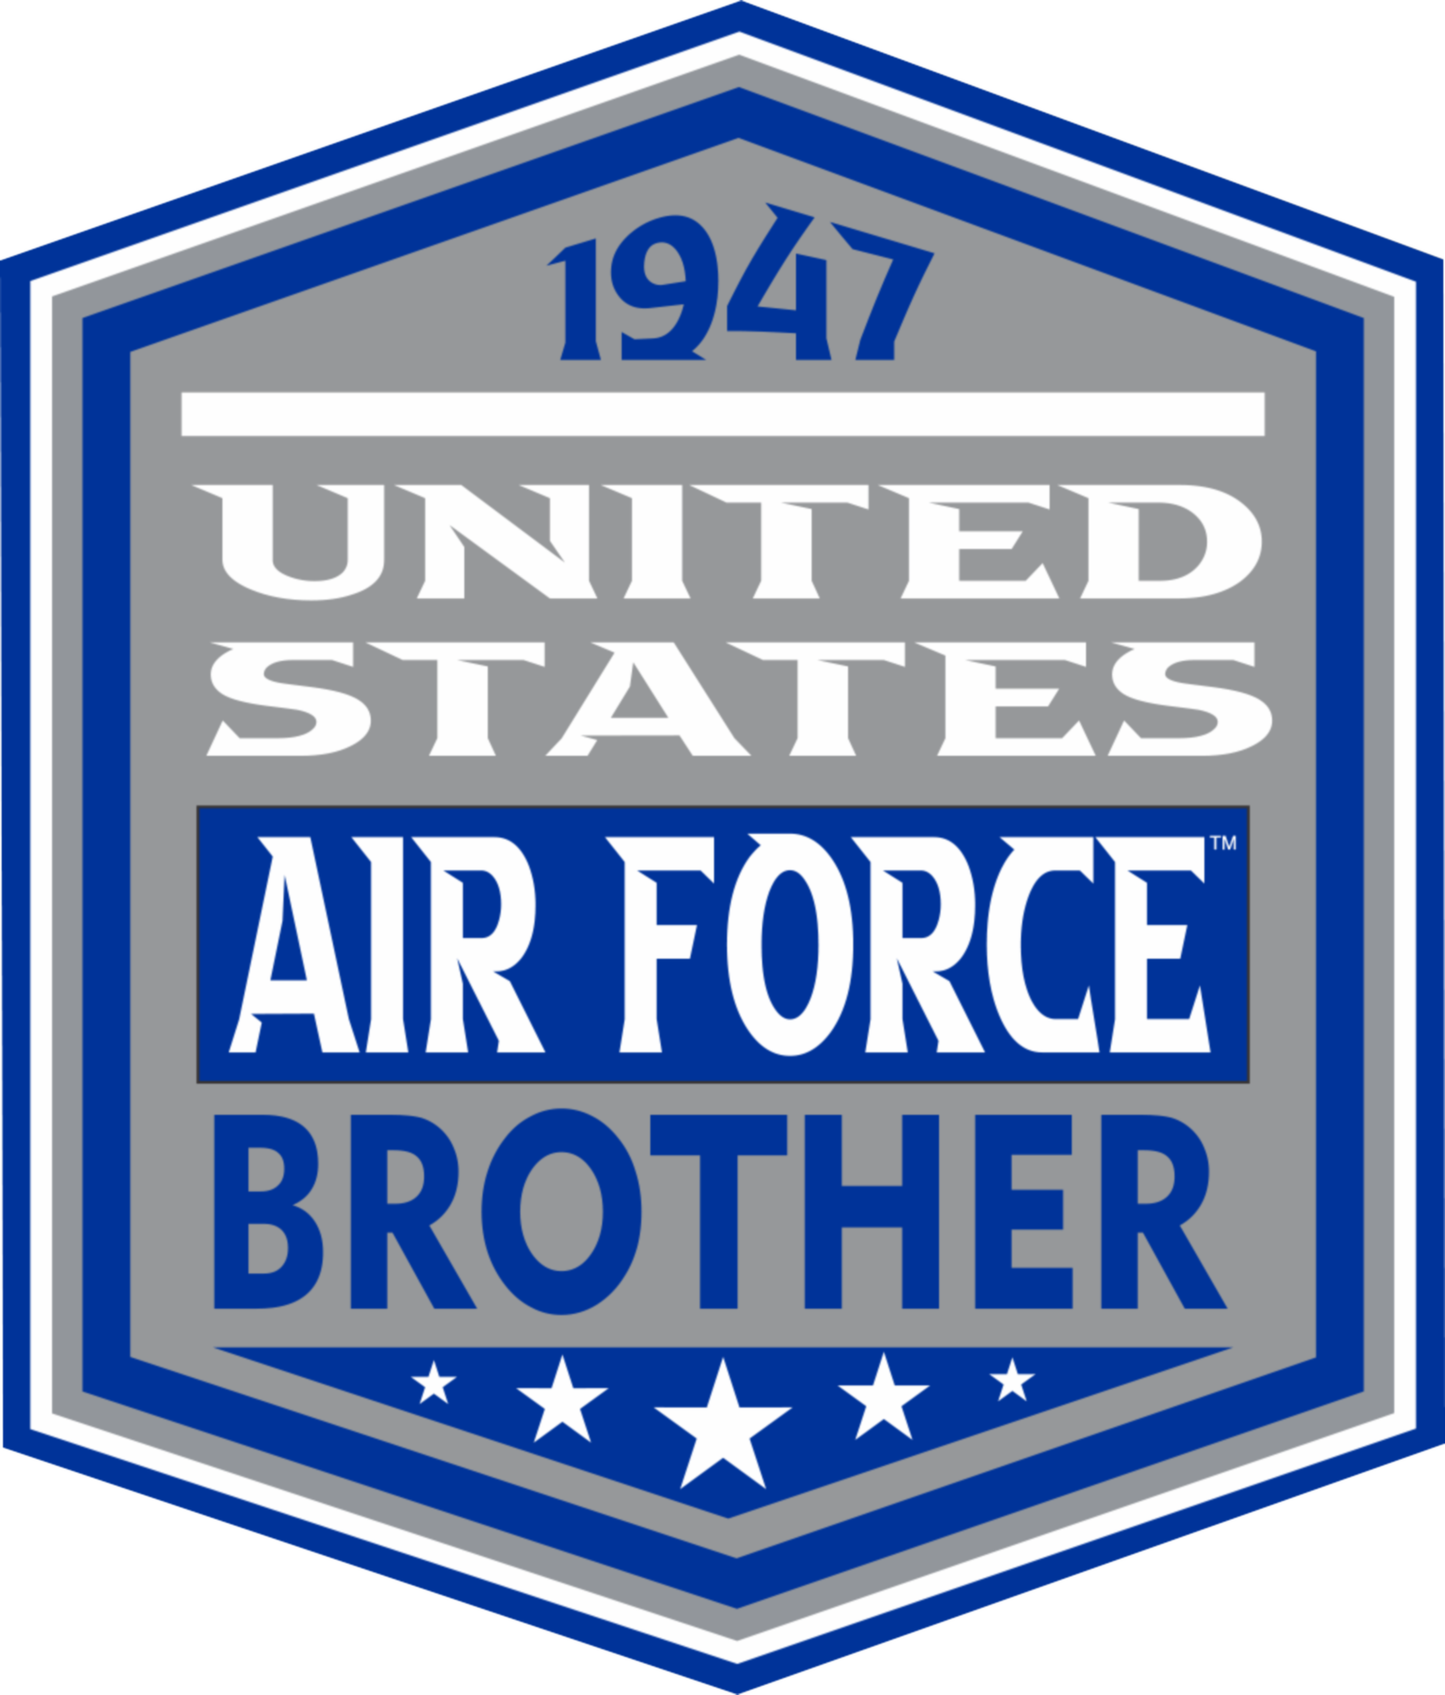 United States Air Force Brother 1947 Sticker